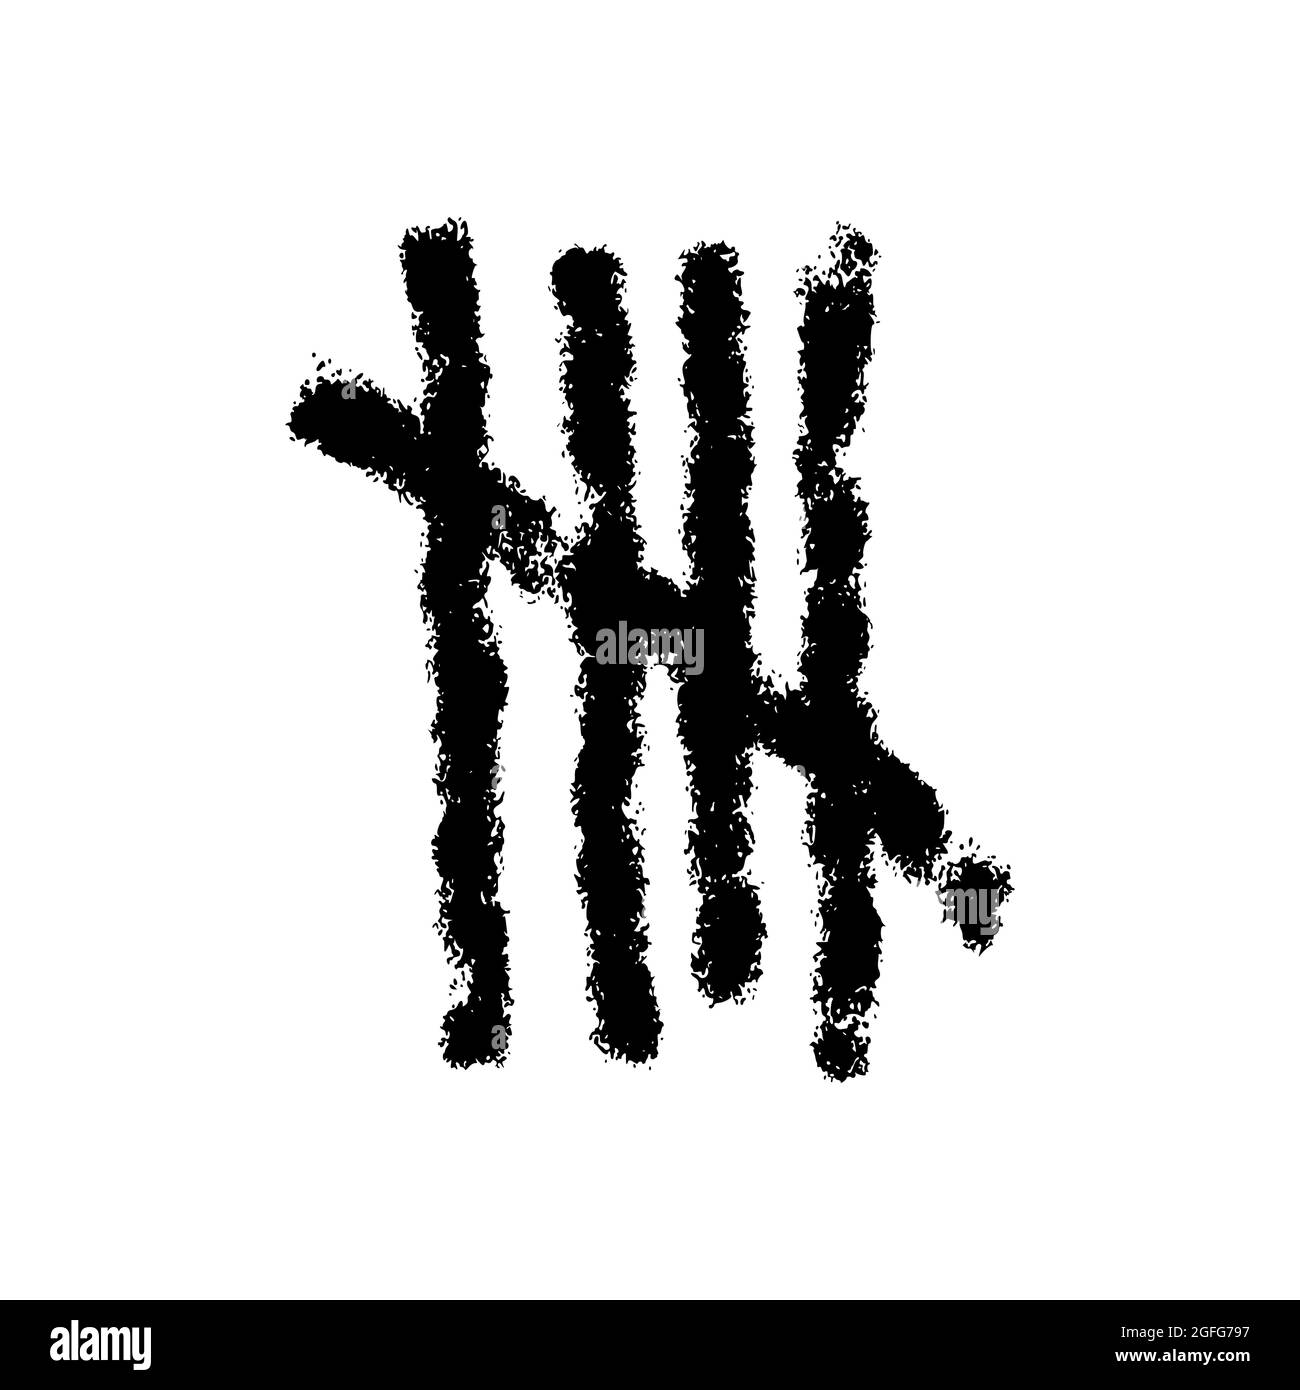 Charcoal tally mark. Hand drawn sticks sorted by four and crossed out by slash line. Day counting symbol on prison wall. Unary numeral system sign. Vector graphic illustration. Stock Vector